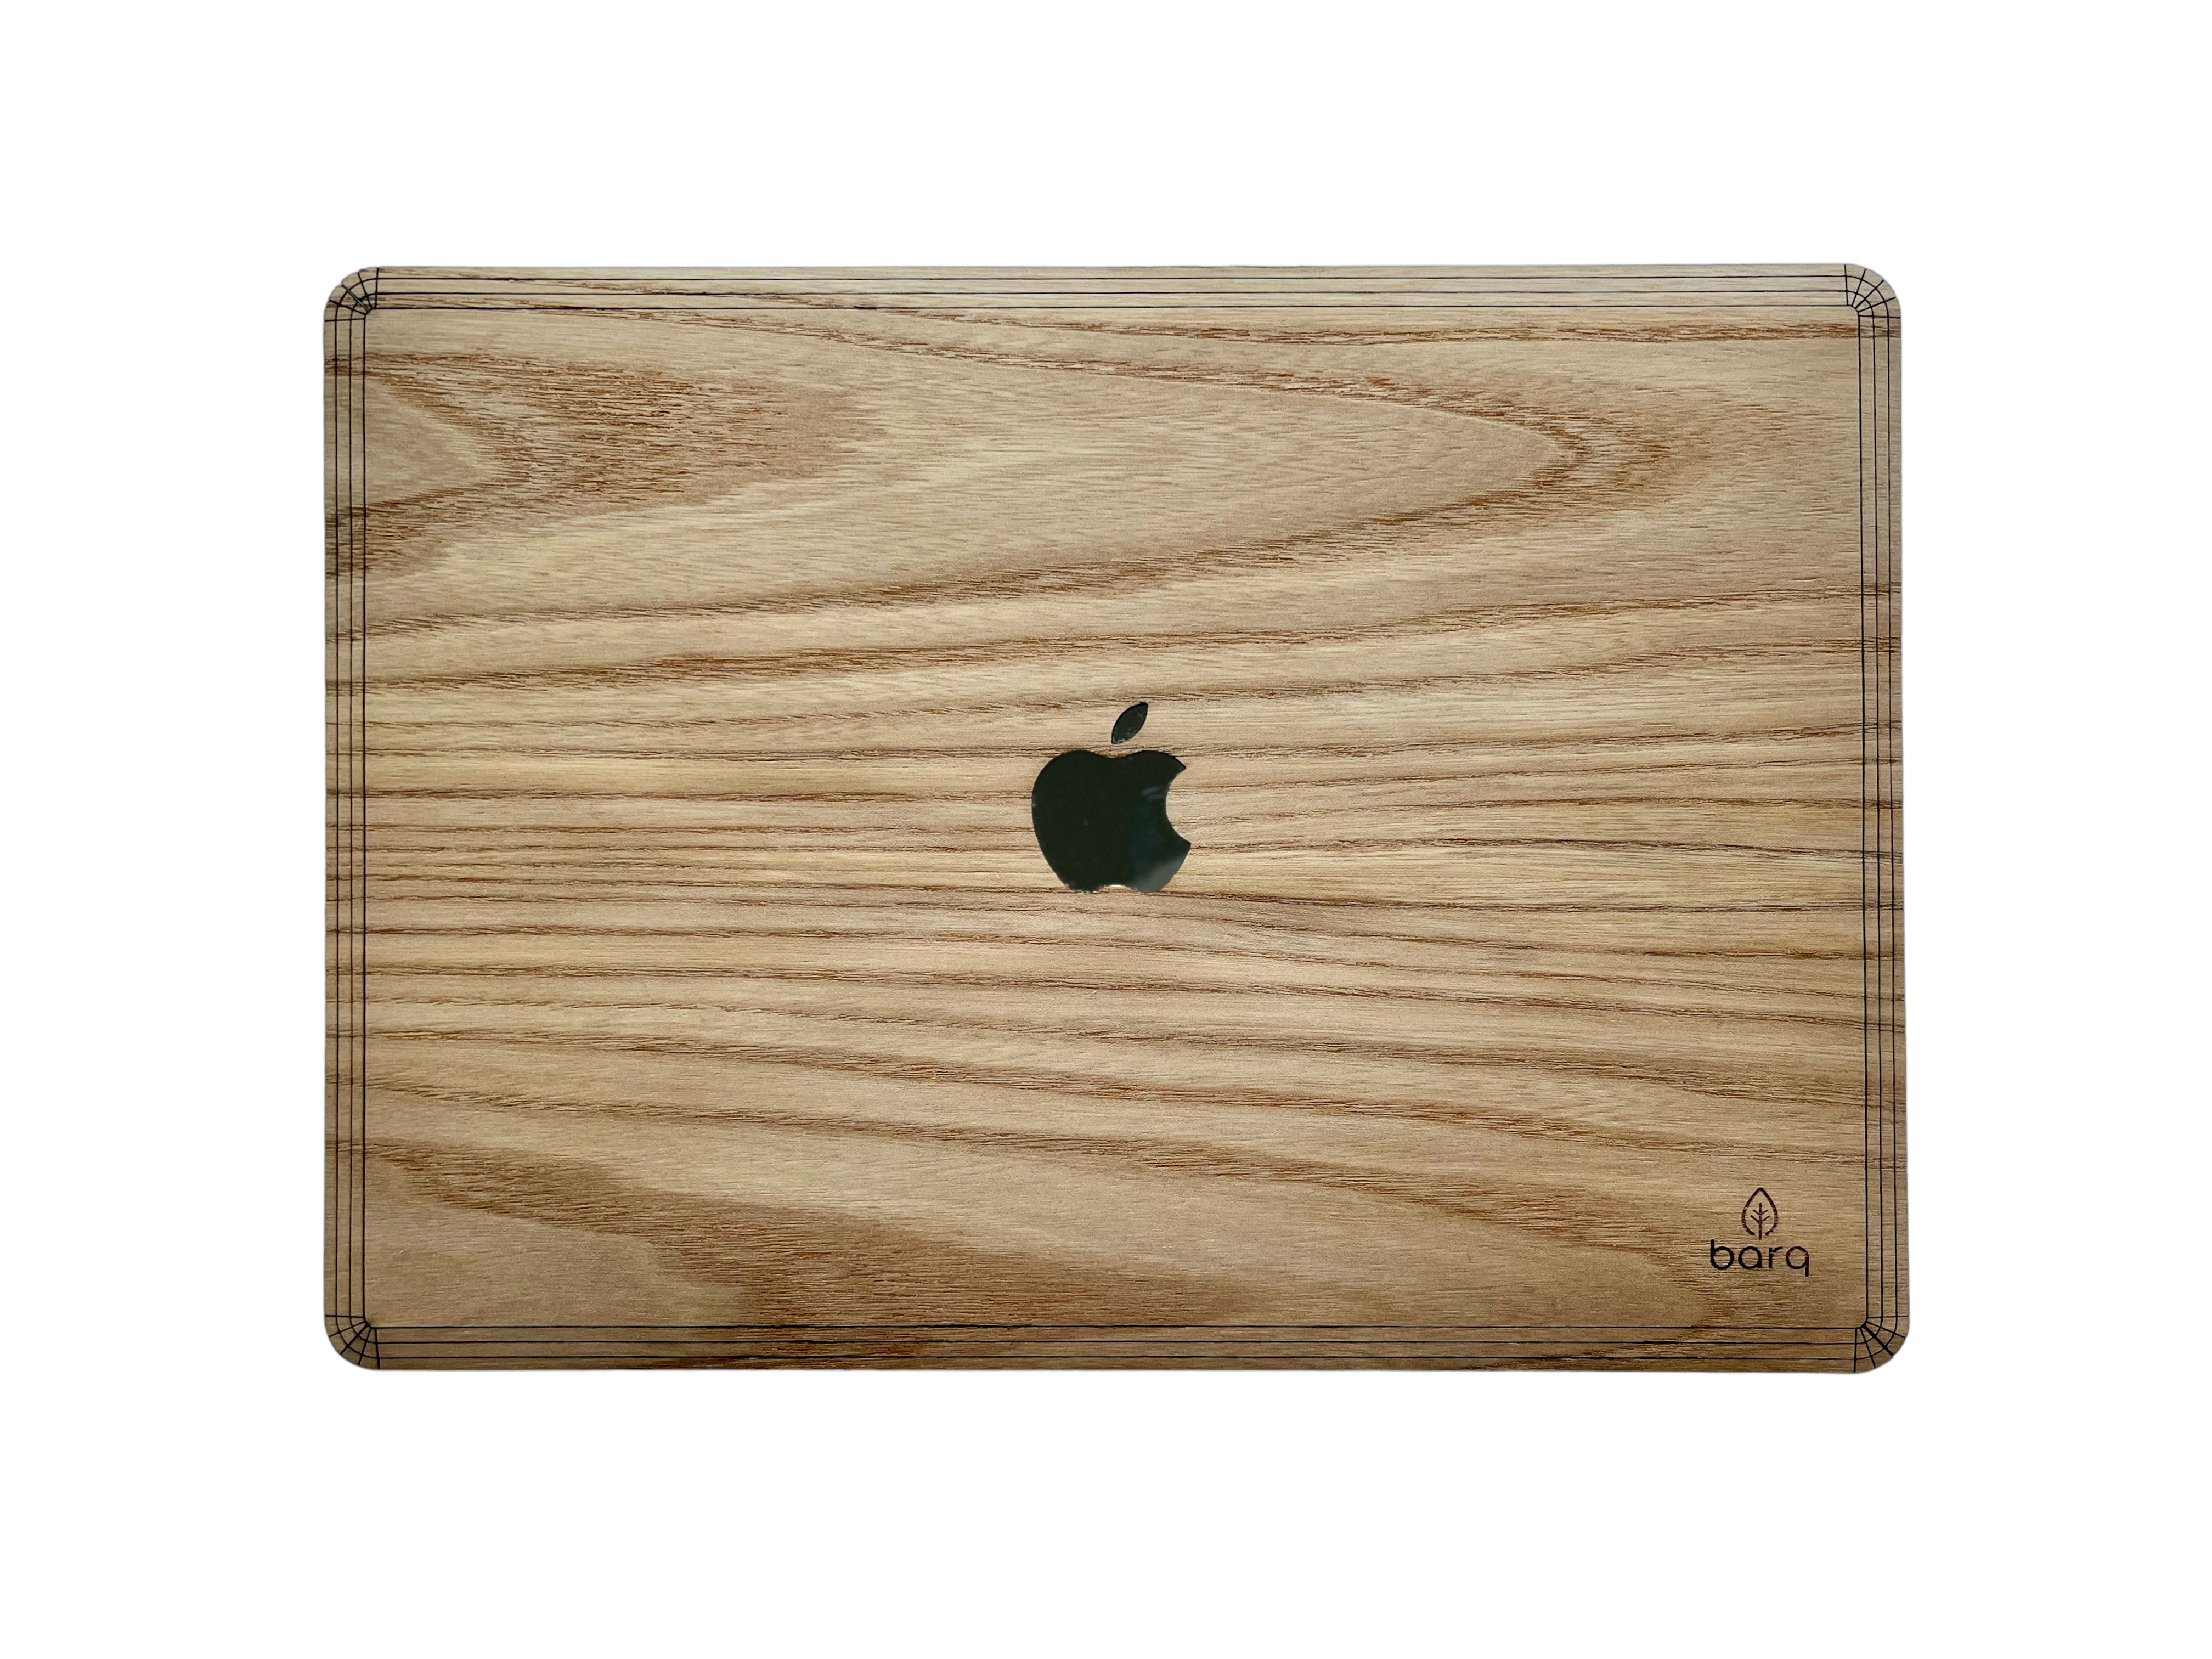 Elm - MacBook Skin Made From Real Wood